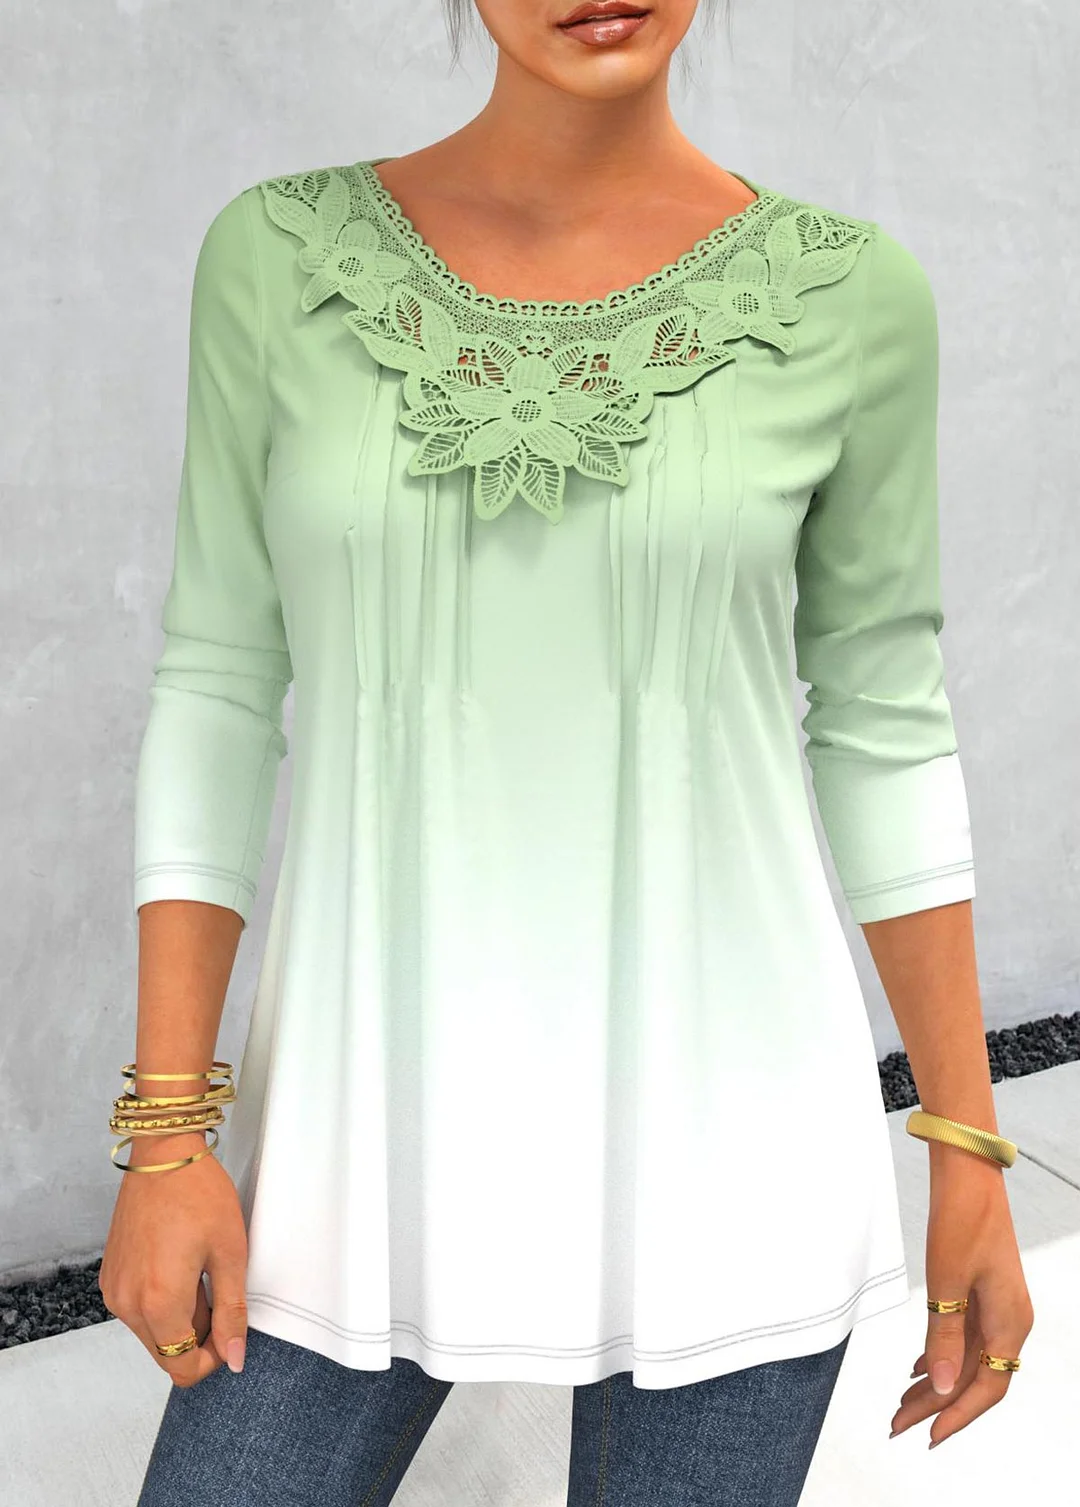 Lace Stitching Ombre Light Green T Shirt